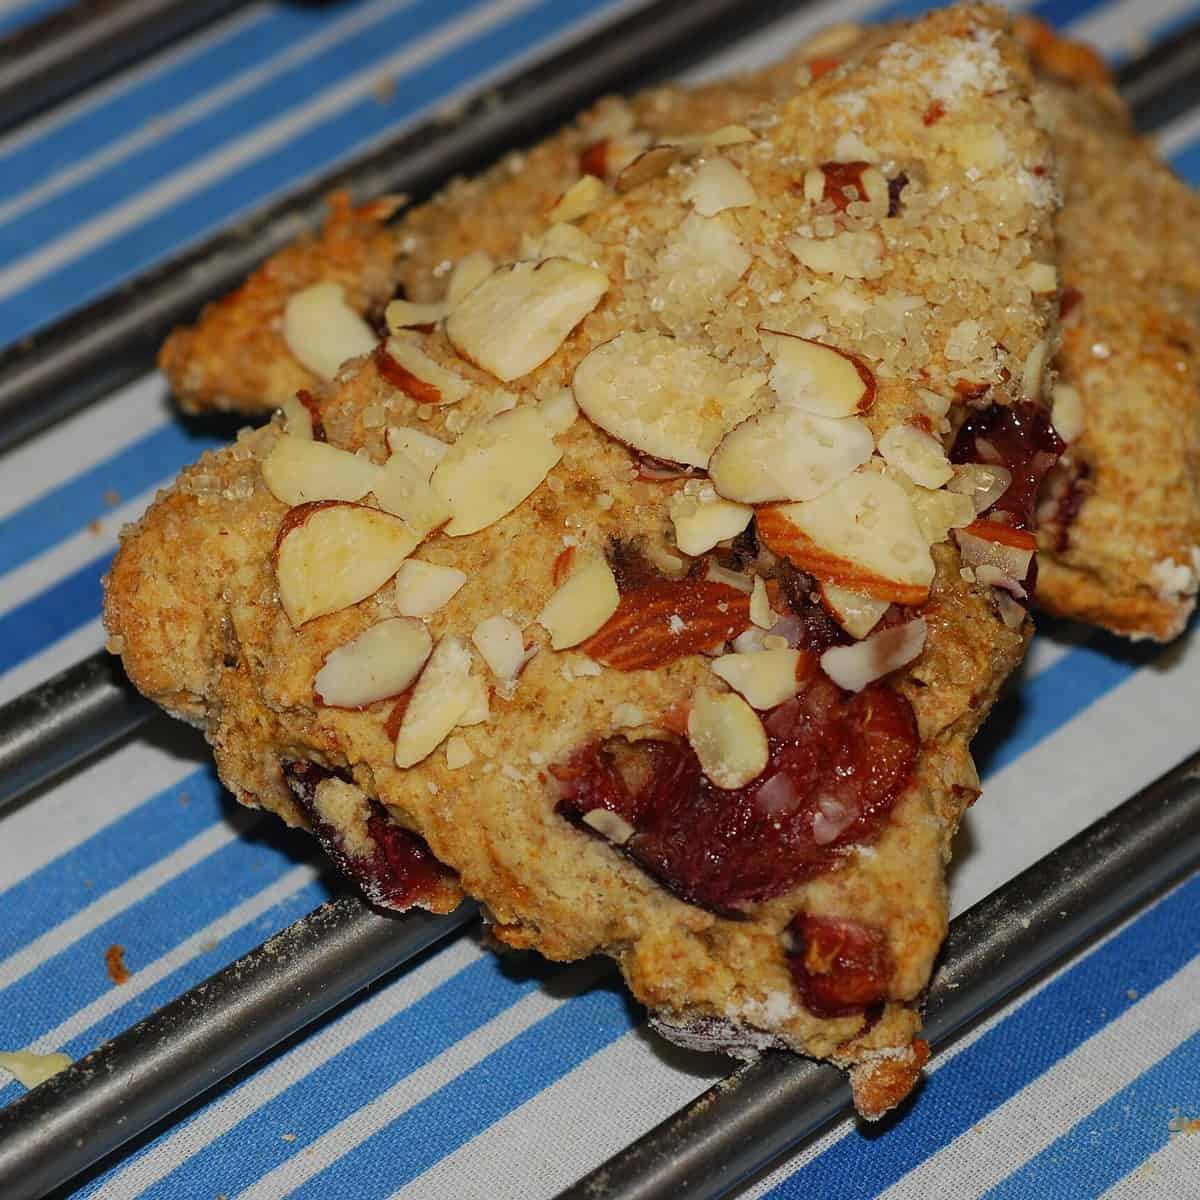 Sure thing! Here are some unique photo captions for the Cherry Almond Mini Scones recipe: